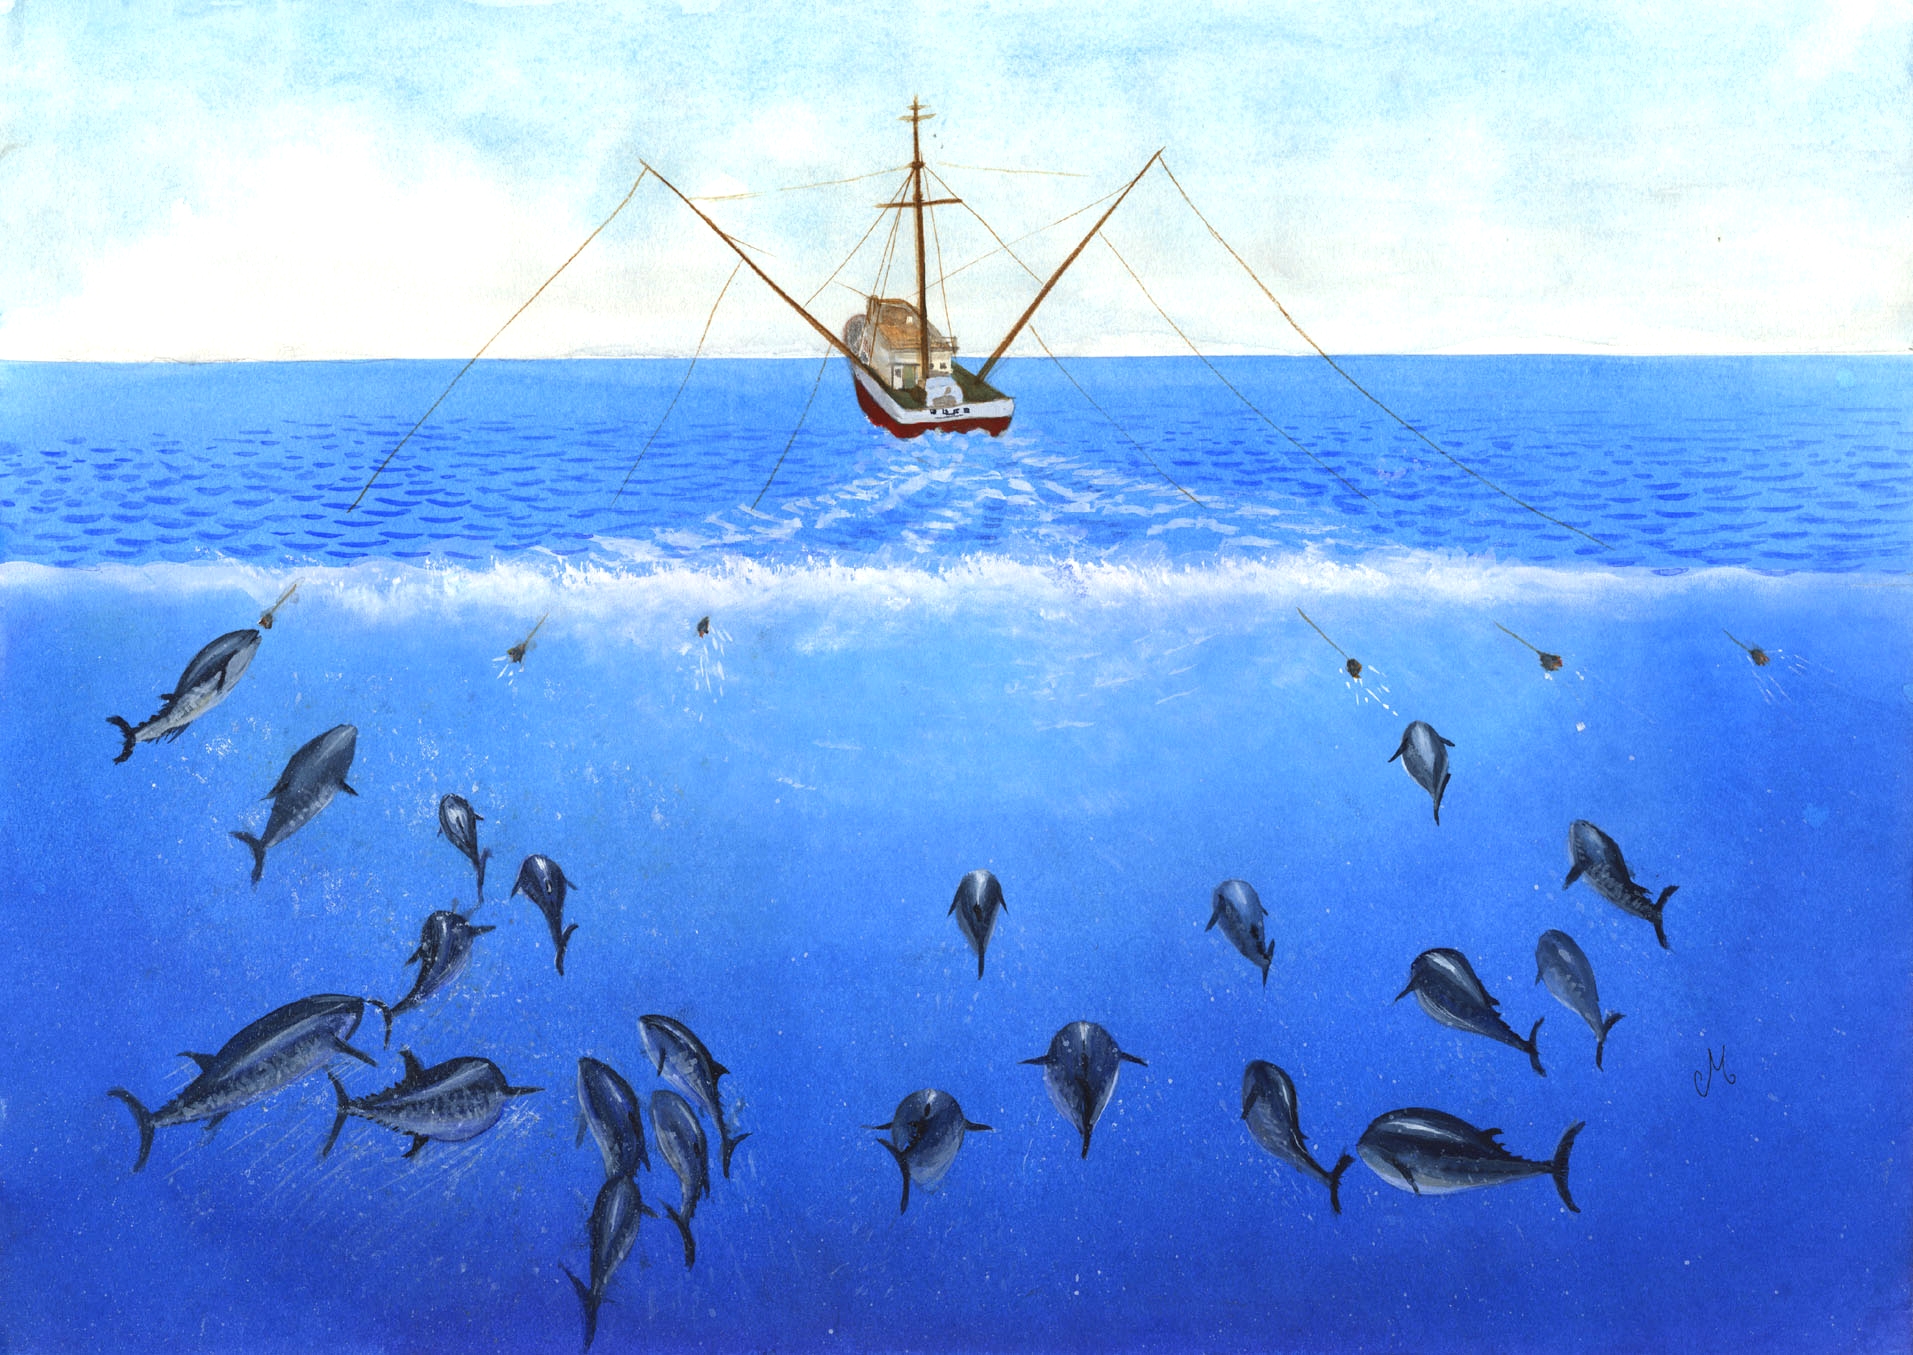 A painting of a fishing boat with multiple fishing lines catching tuna